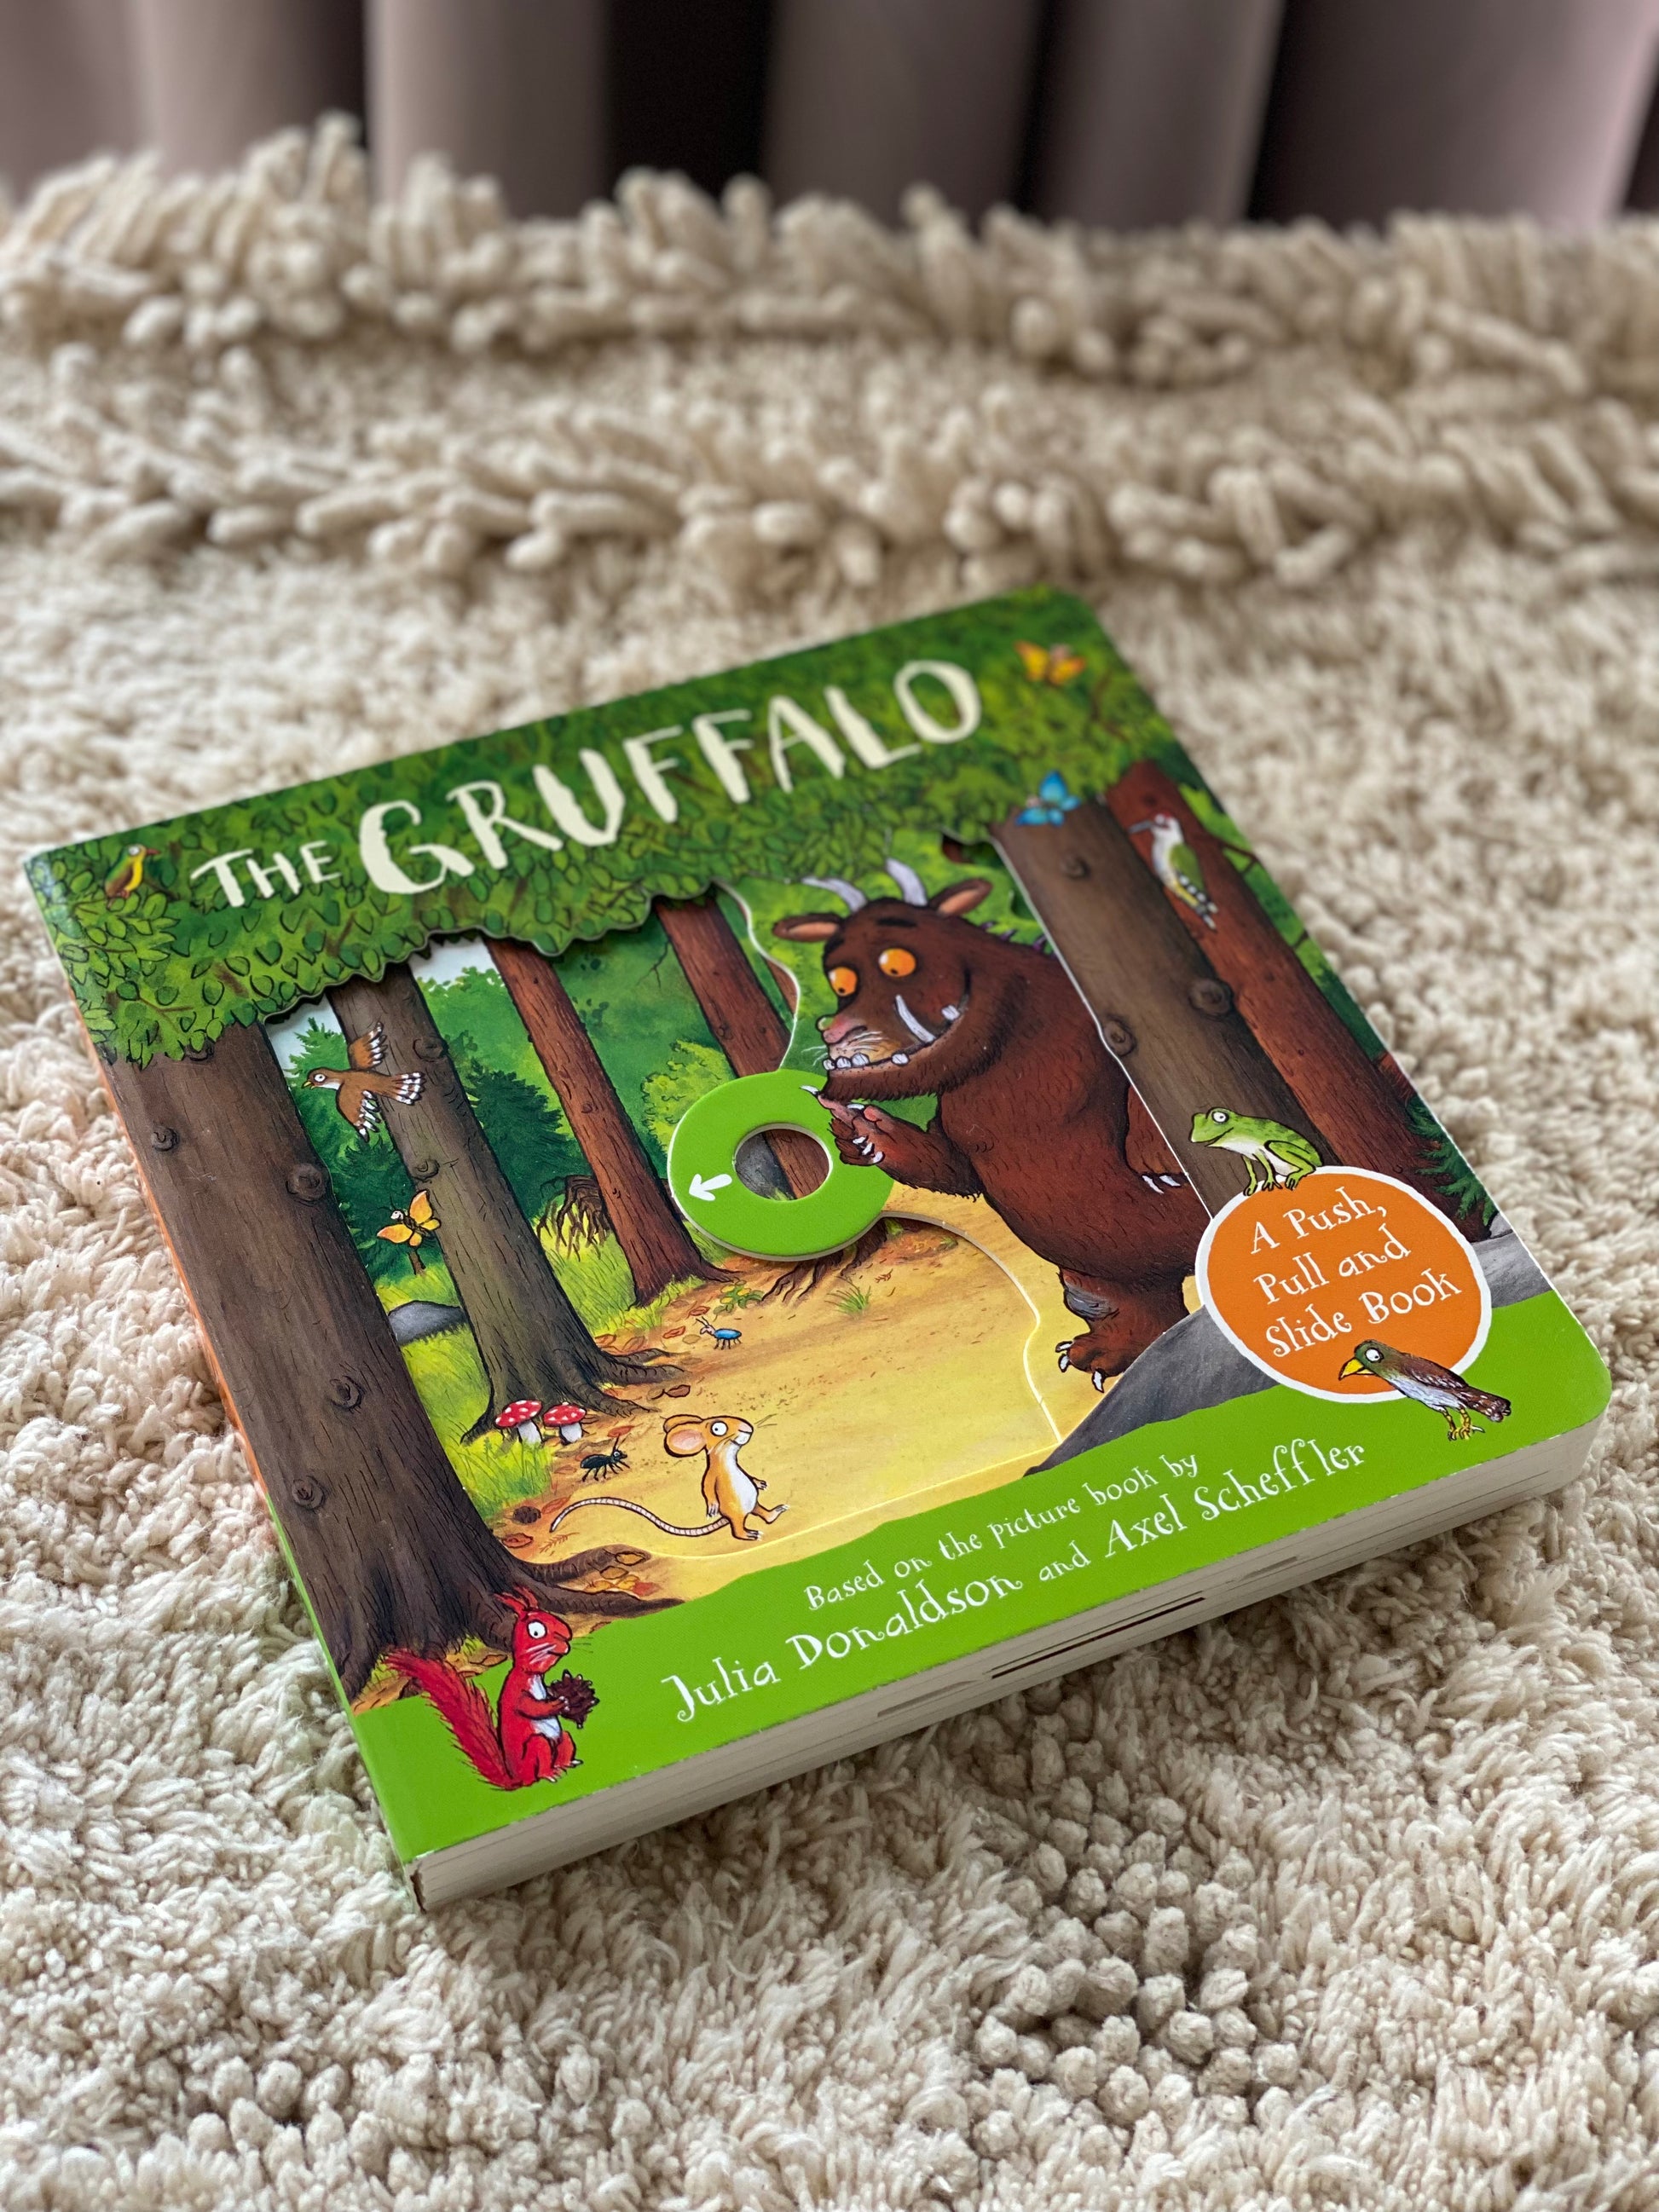 The Gruffalo: A Push, Pull and Slide Book – Clap Clap Hands